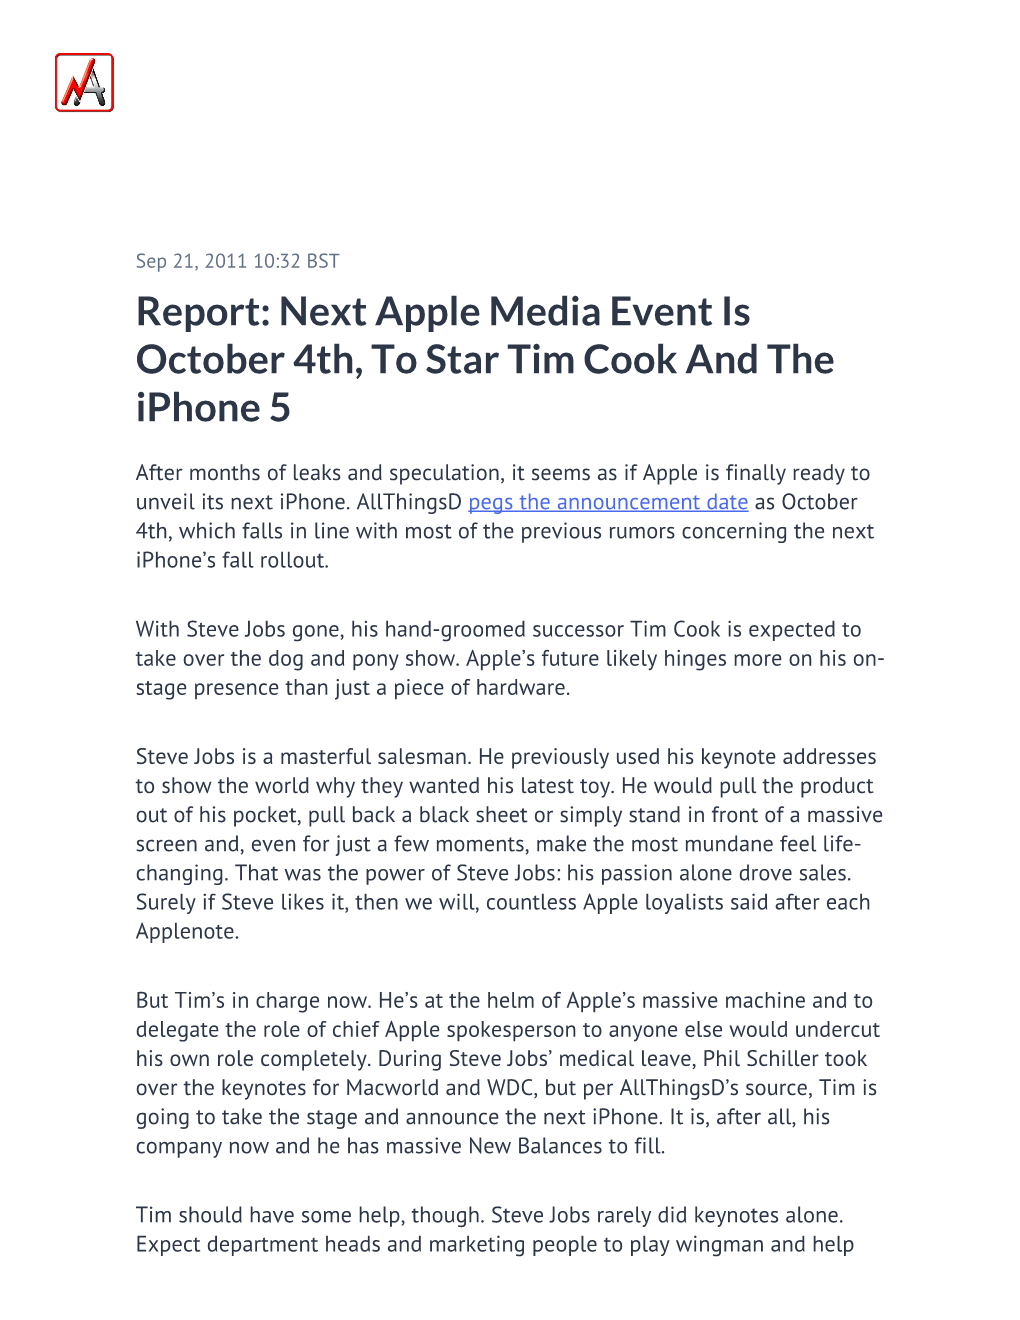 Next Apple Media Event Is October 4Th, to Star Tim Cook and the Iphone 5